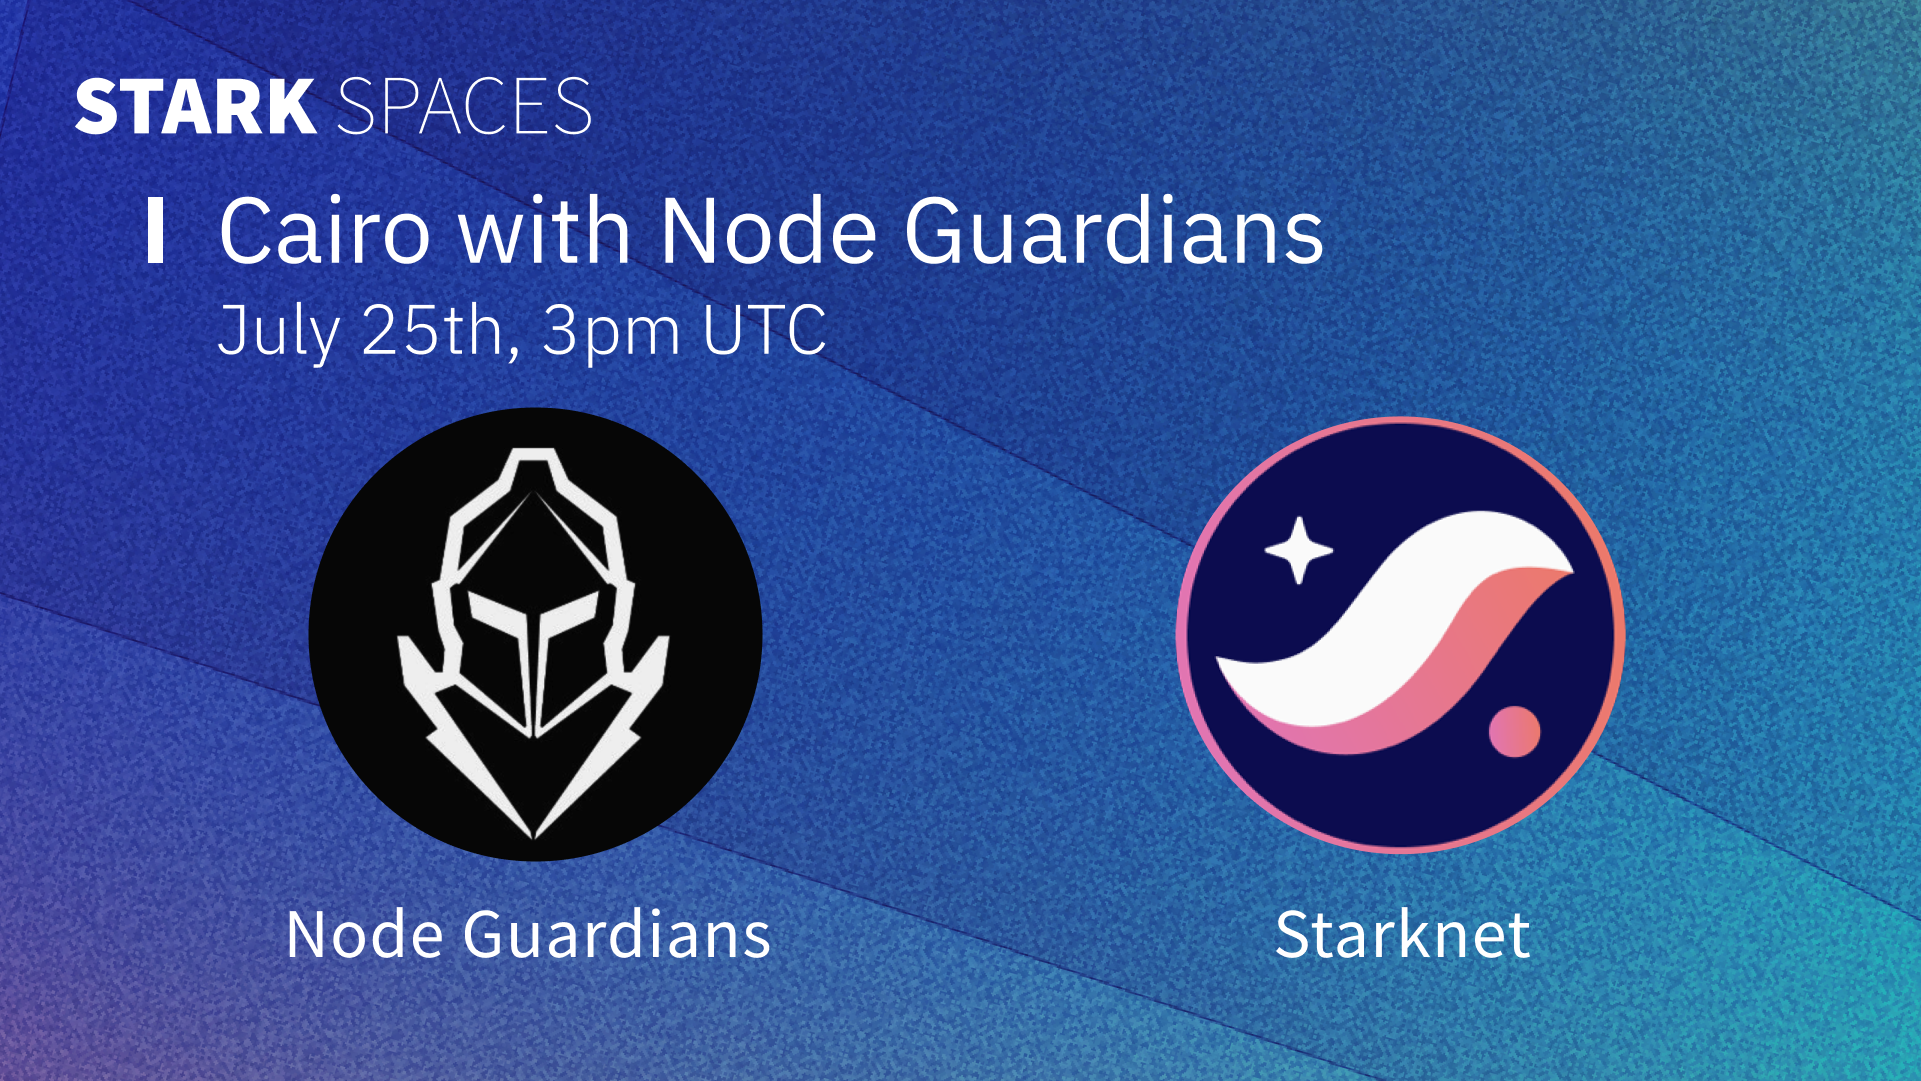 Twitter Space: Cairo with Node Guardians